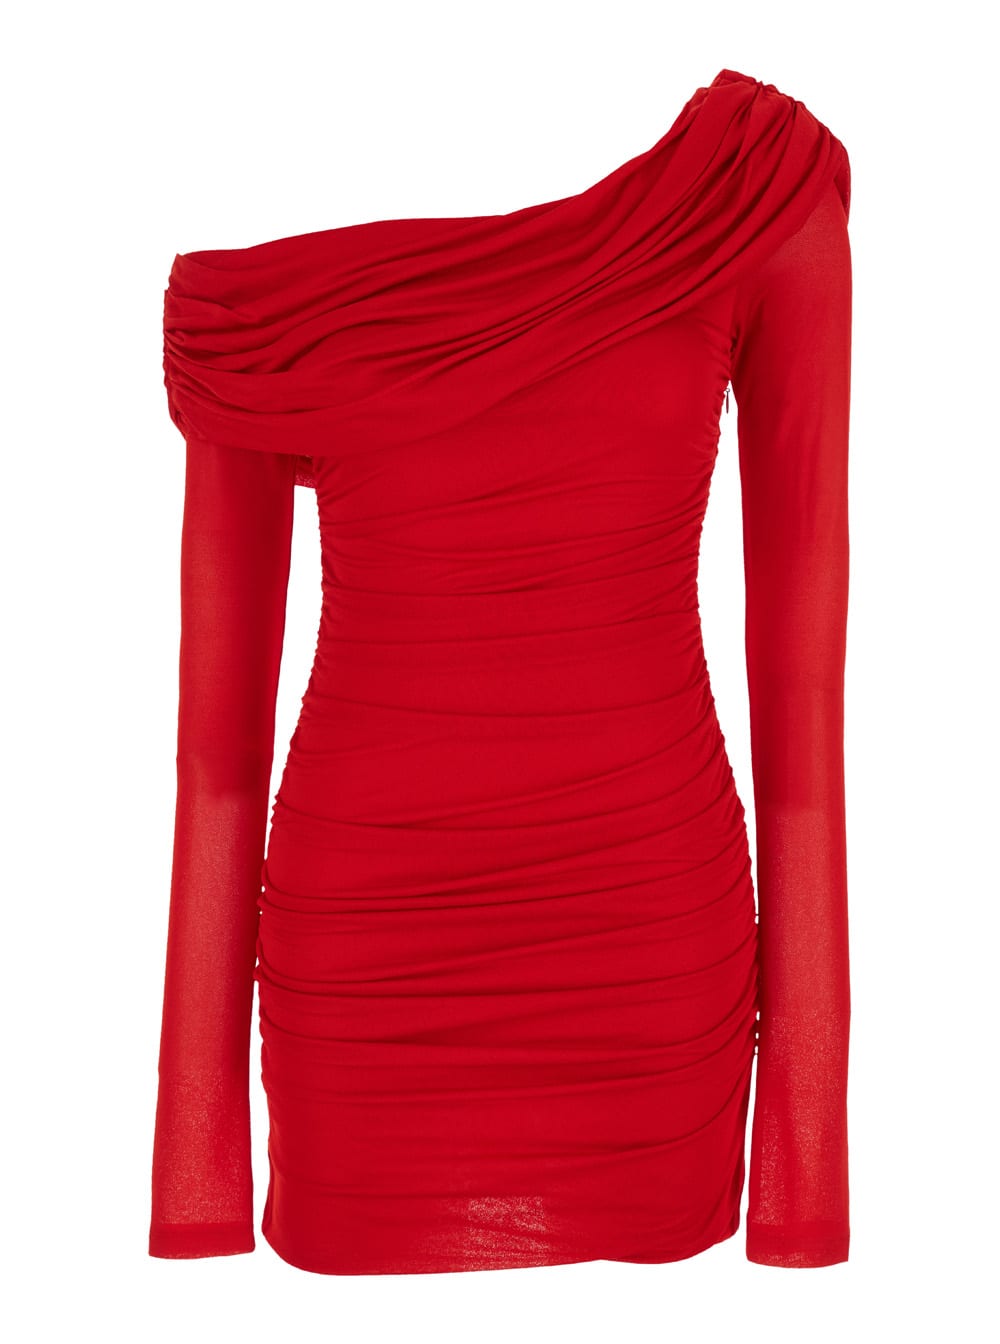 BLUMARINE RED ONE-SHOULDER SHORT DRESS WITH RUFFLES IN VISCOSE WOMAN